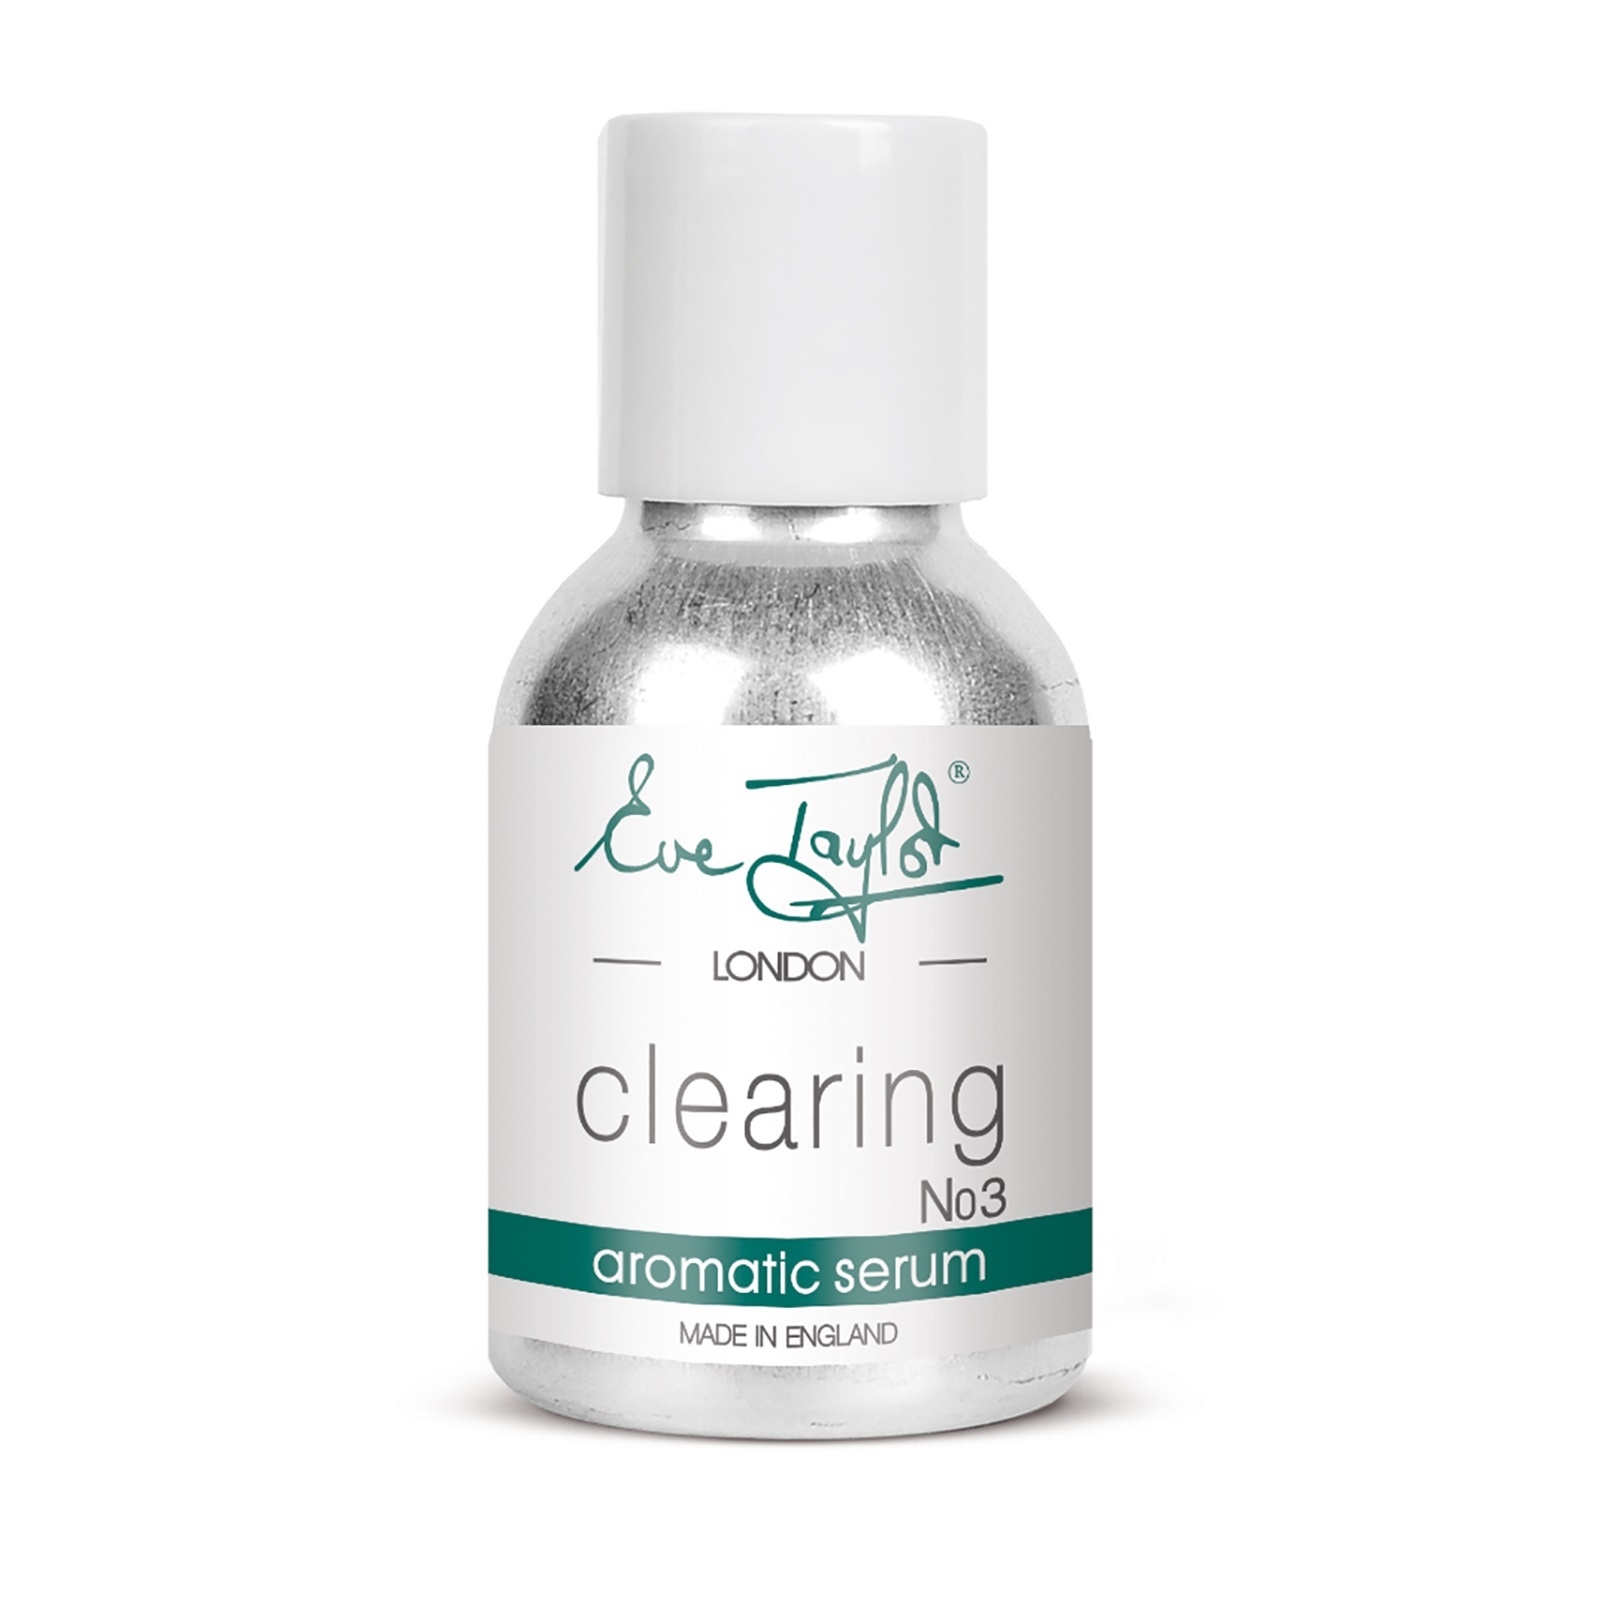 Eve Taylor Aromatic Serum - Clearing (No.3)